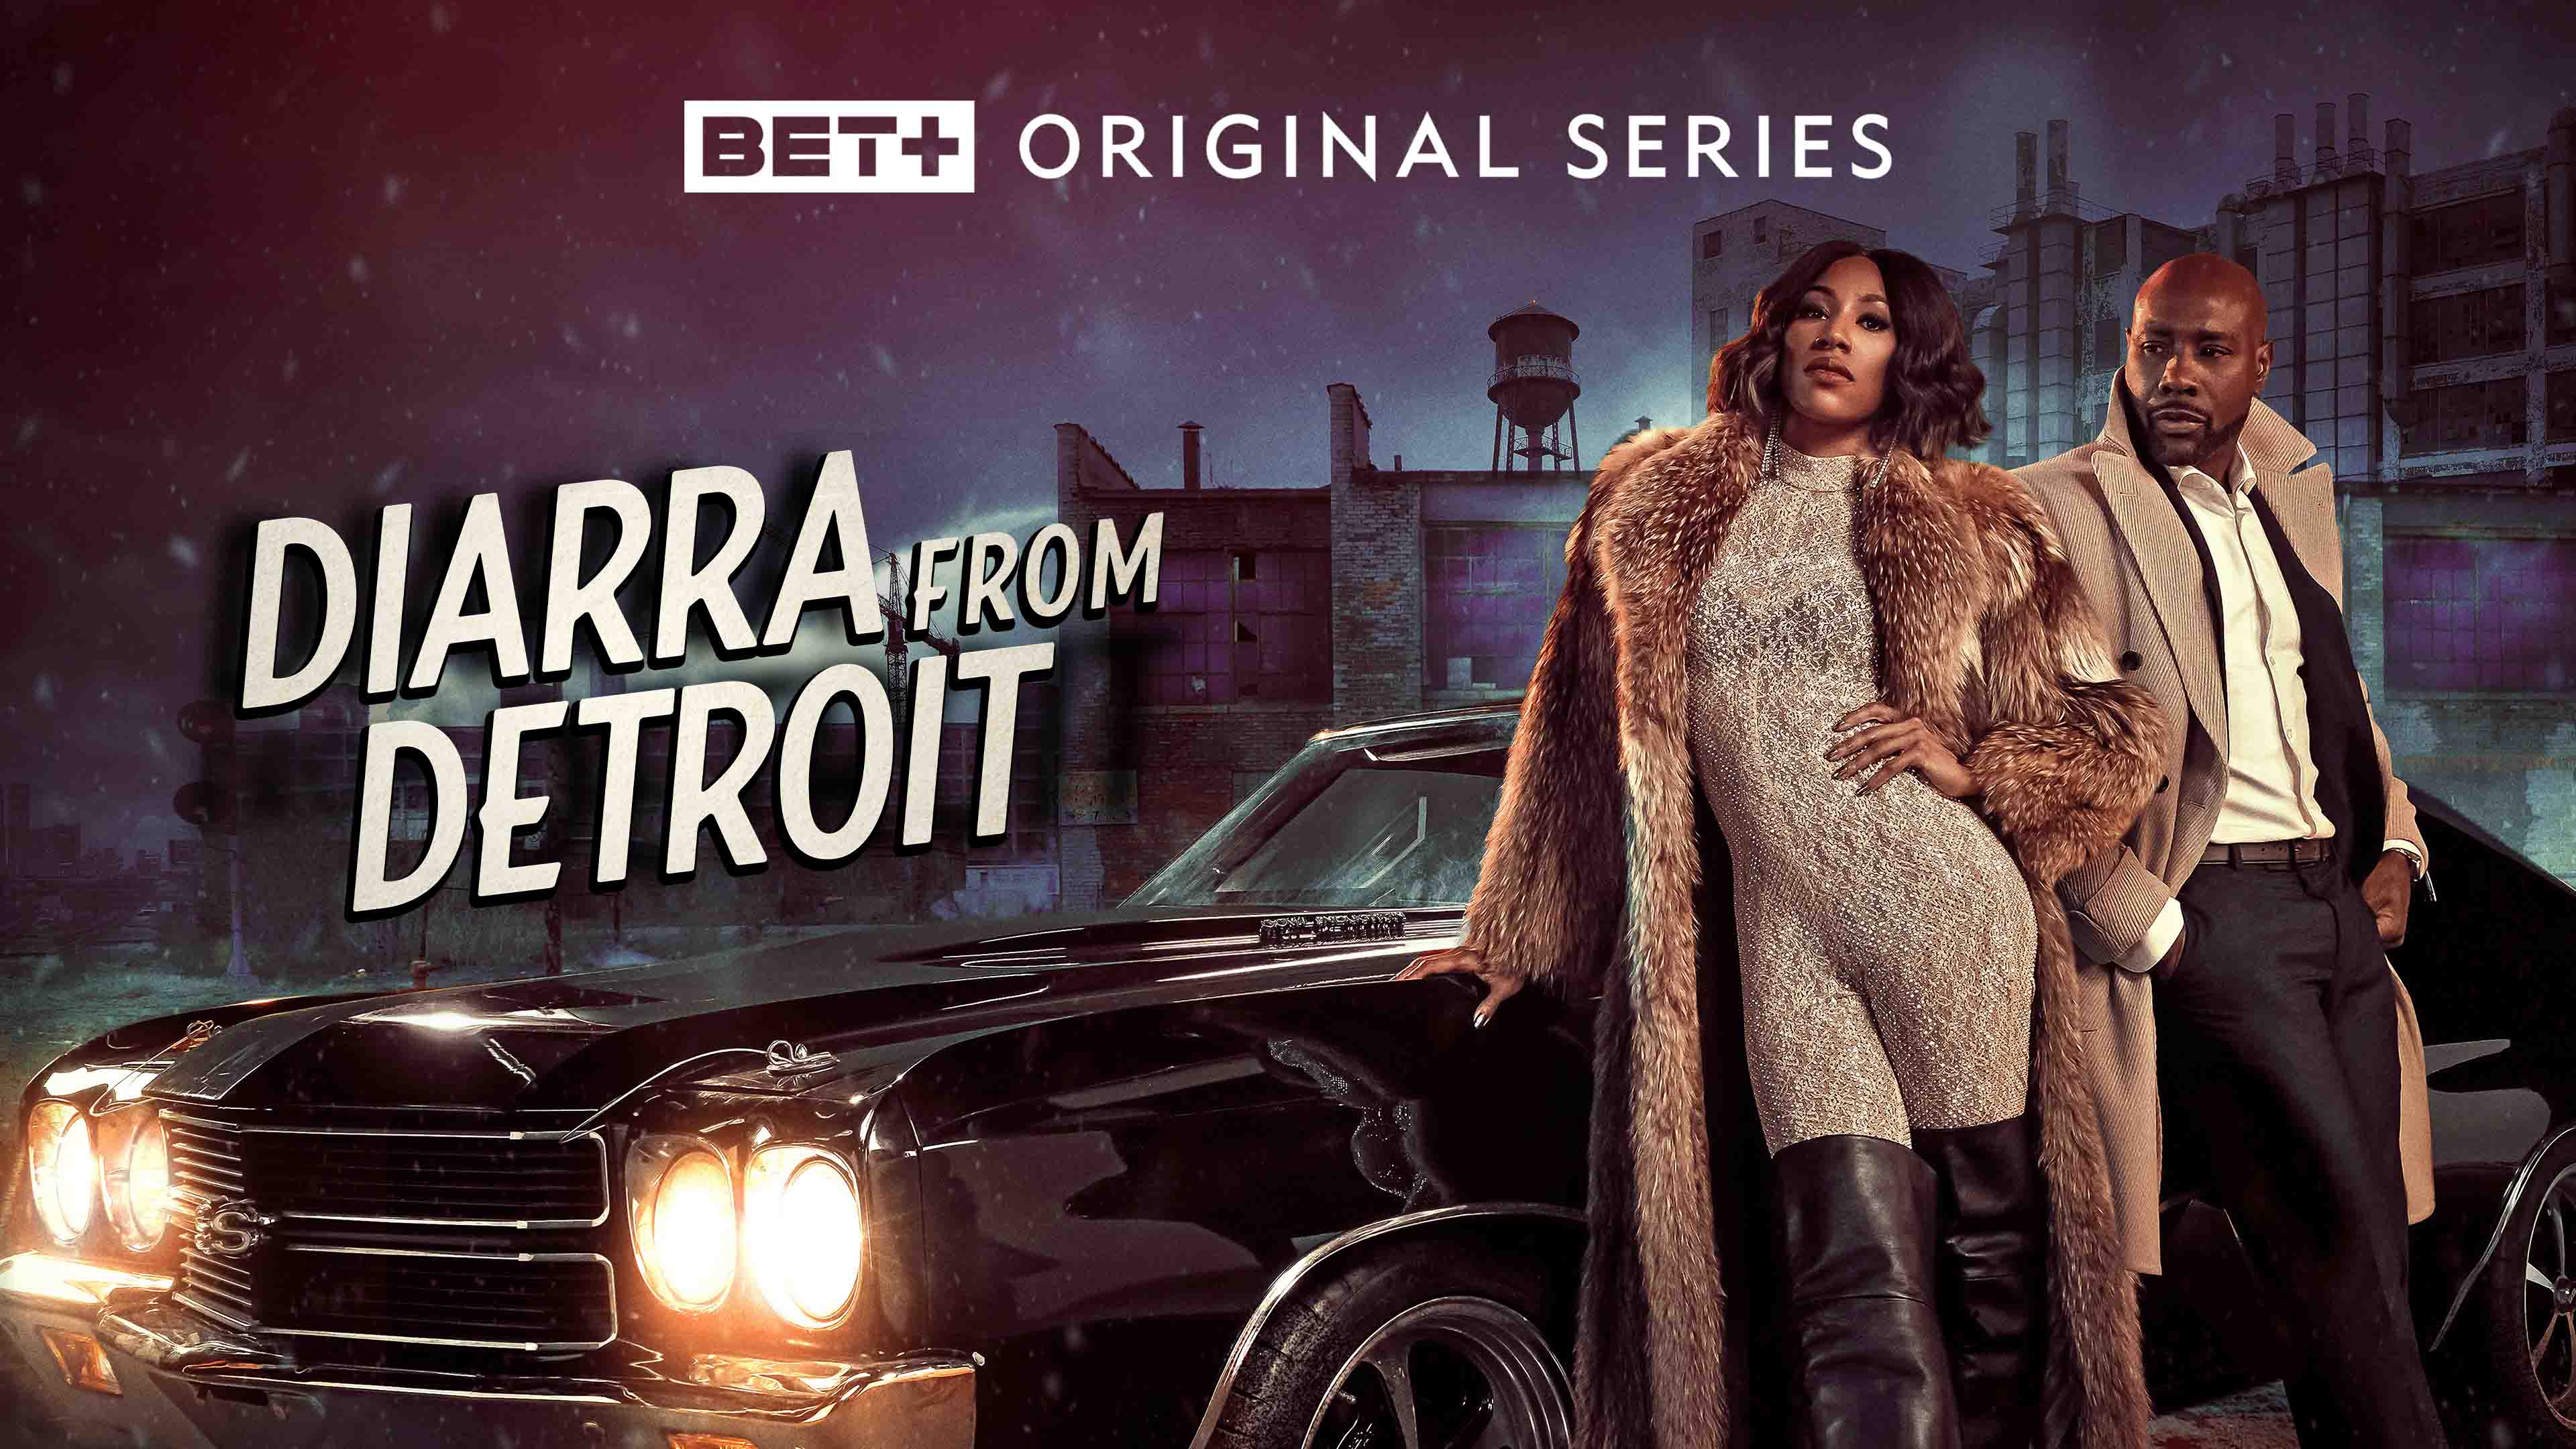 ‘Diarra From Detroit’ Exceeds Expectations as a Funny and Engaging Mystery Comedy- Review